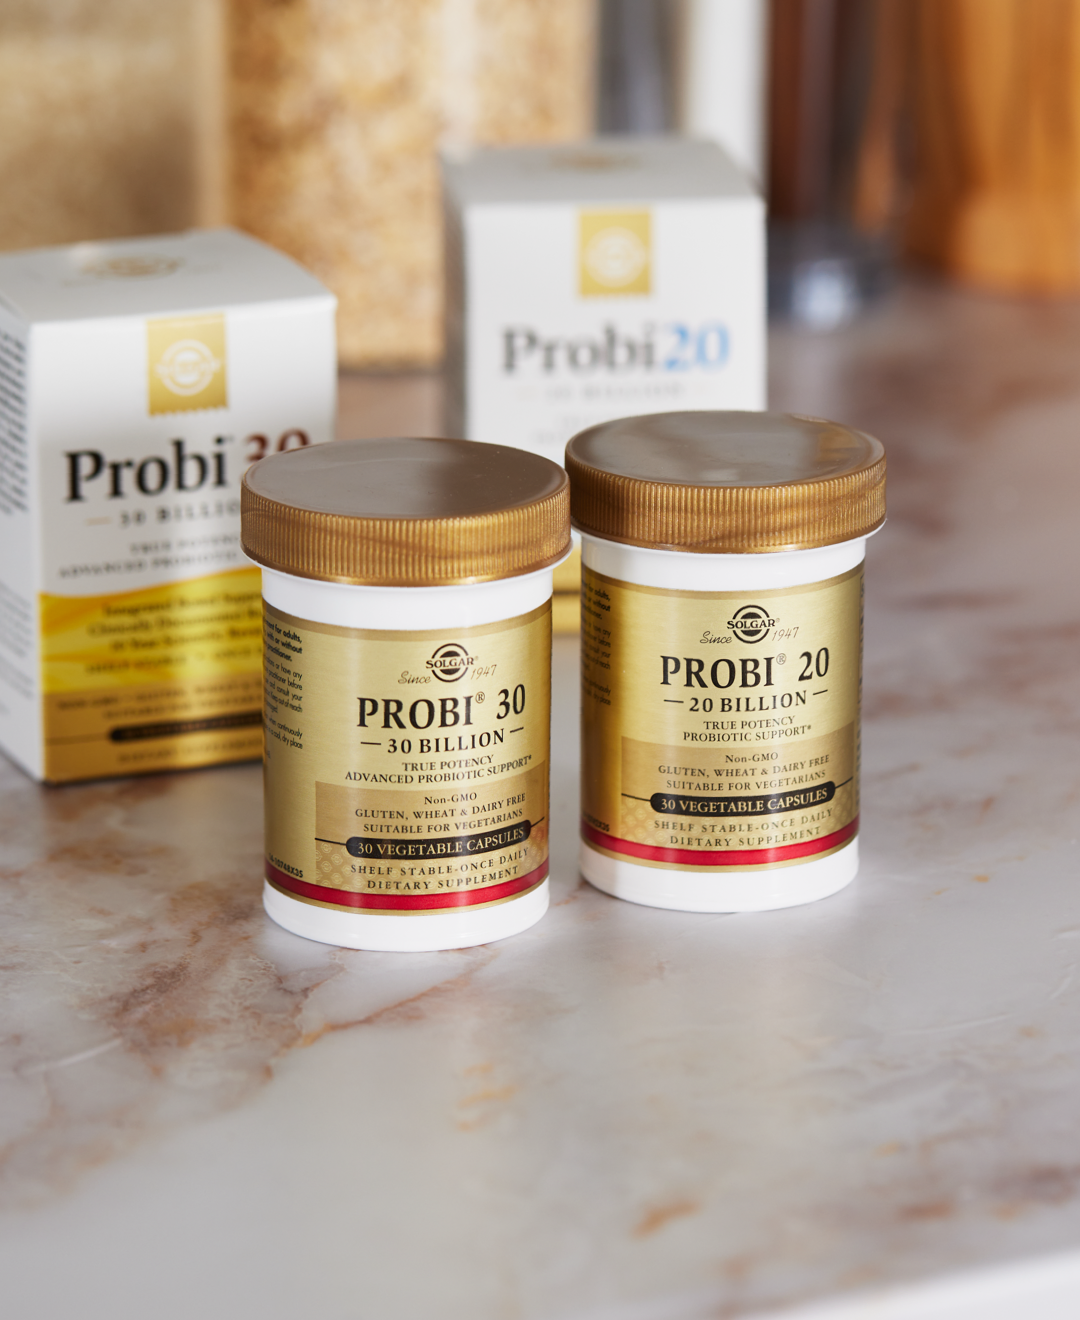 Solgar Probi 20 and Probi 30 probiotic supplements laid out on a white marble kitchen counter. In the background, array of blurry kitchen items.